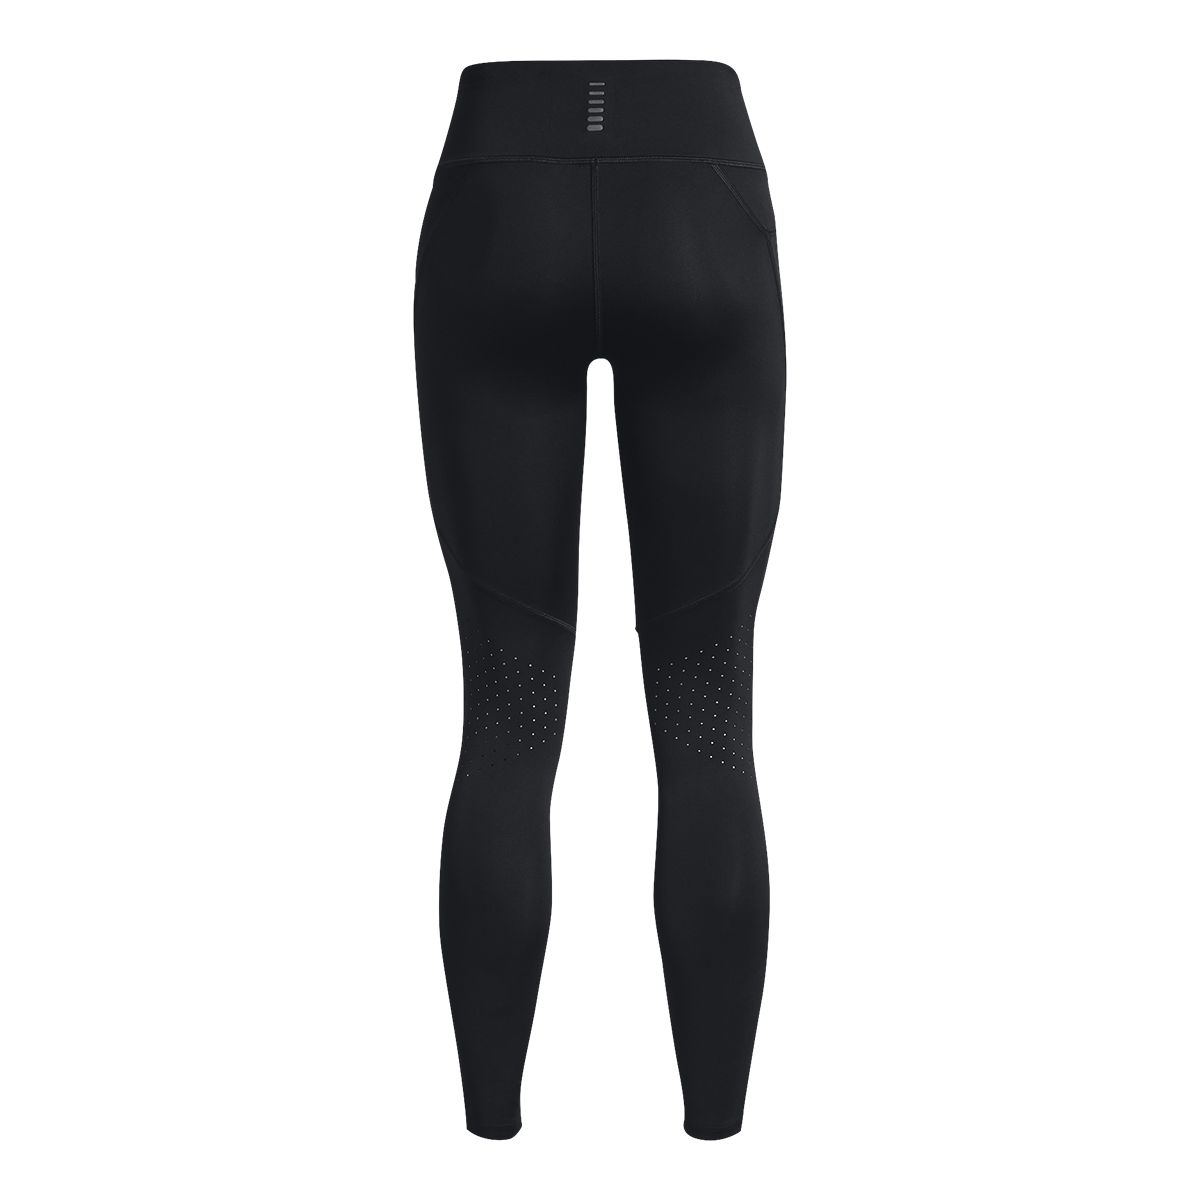 Under Armour Women's Run Fly Fast 3.0 Tights